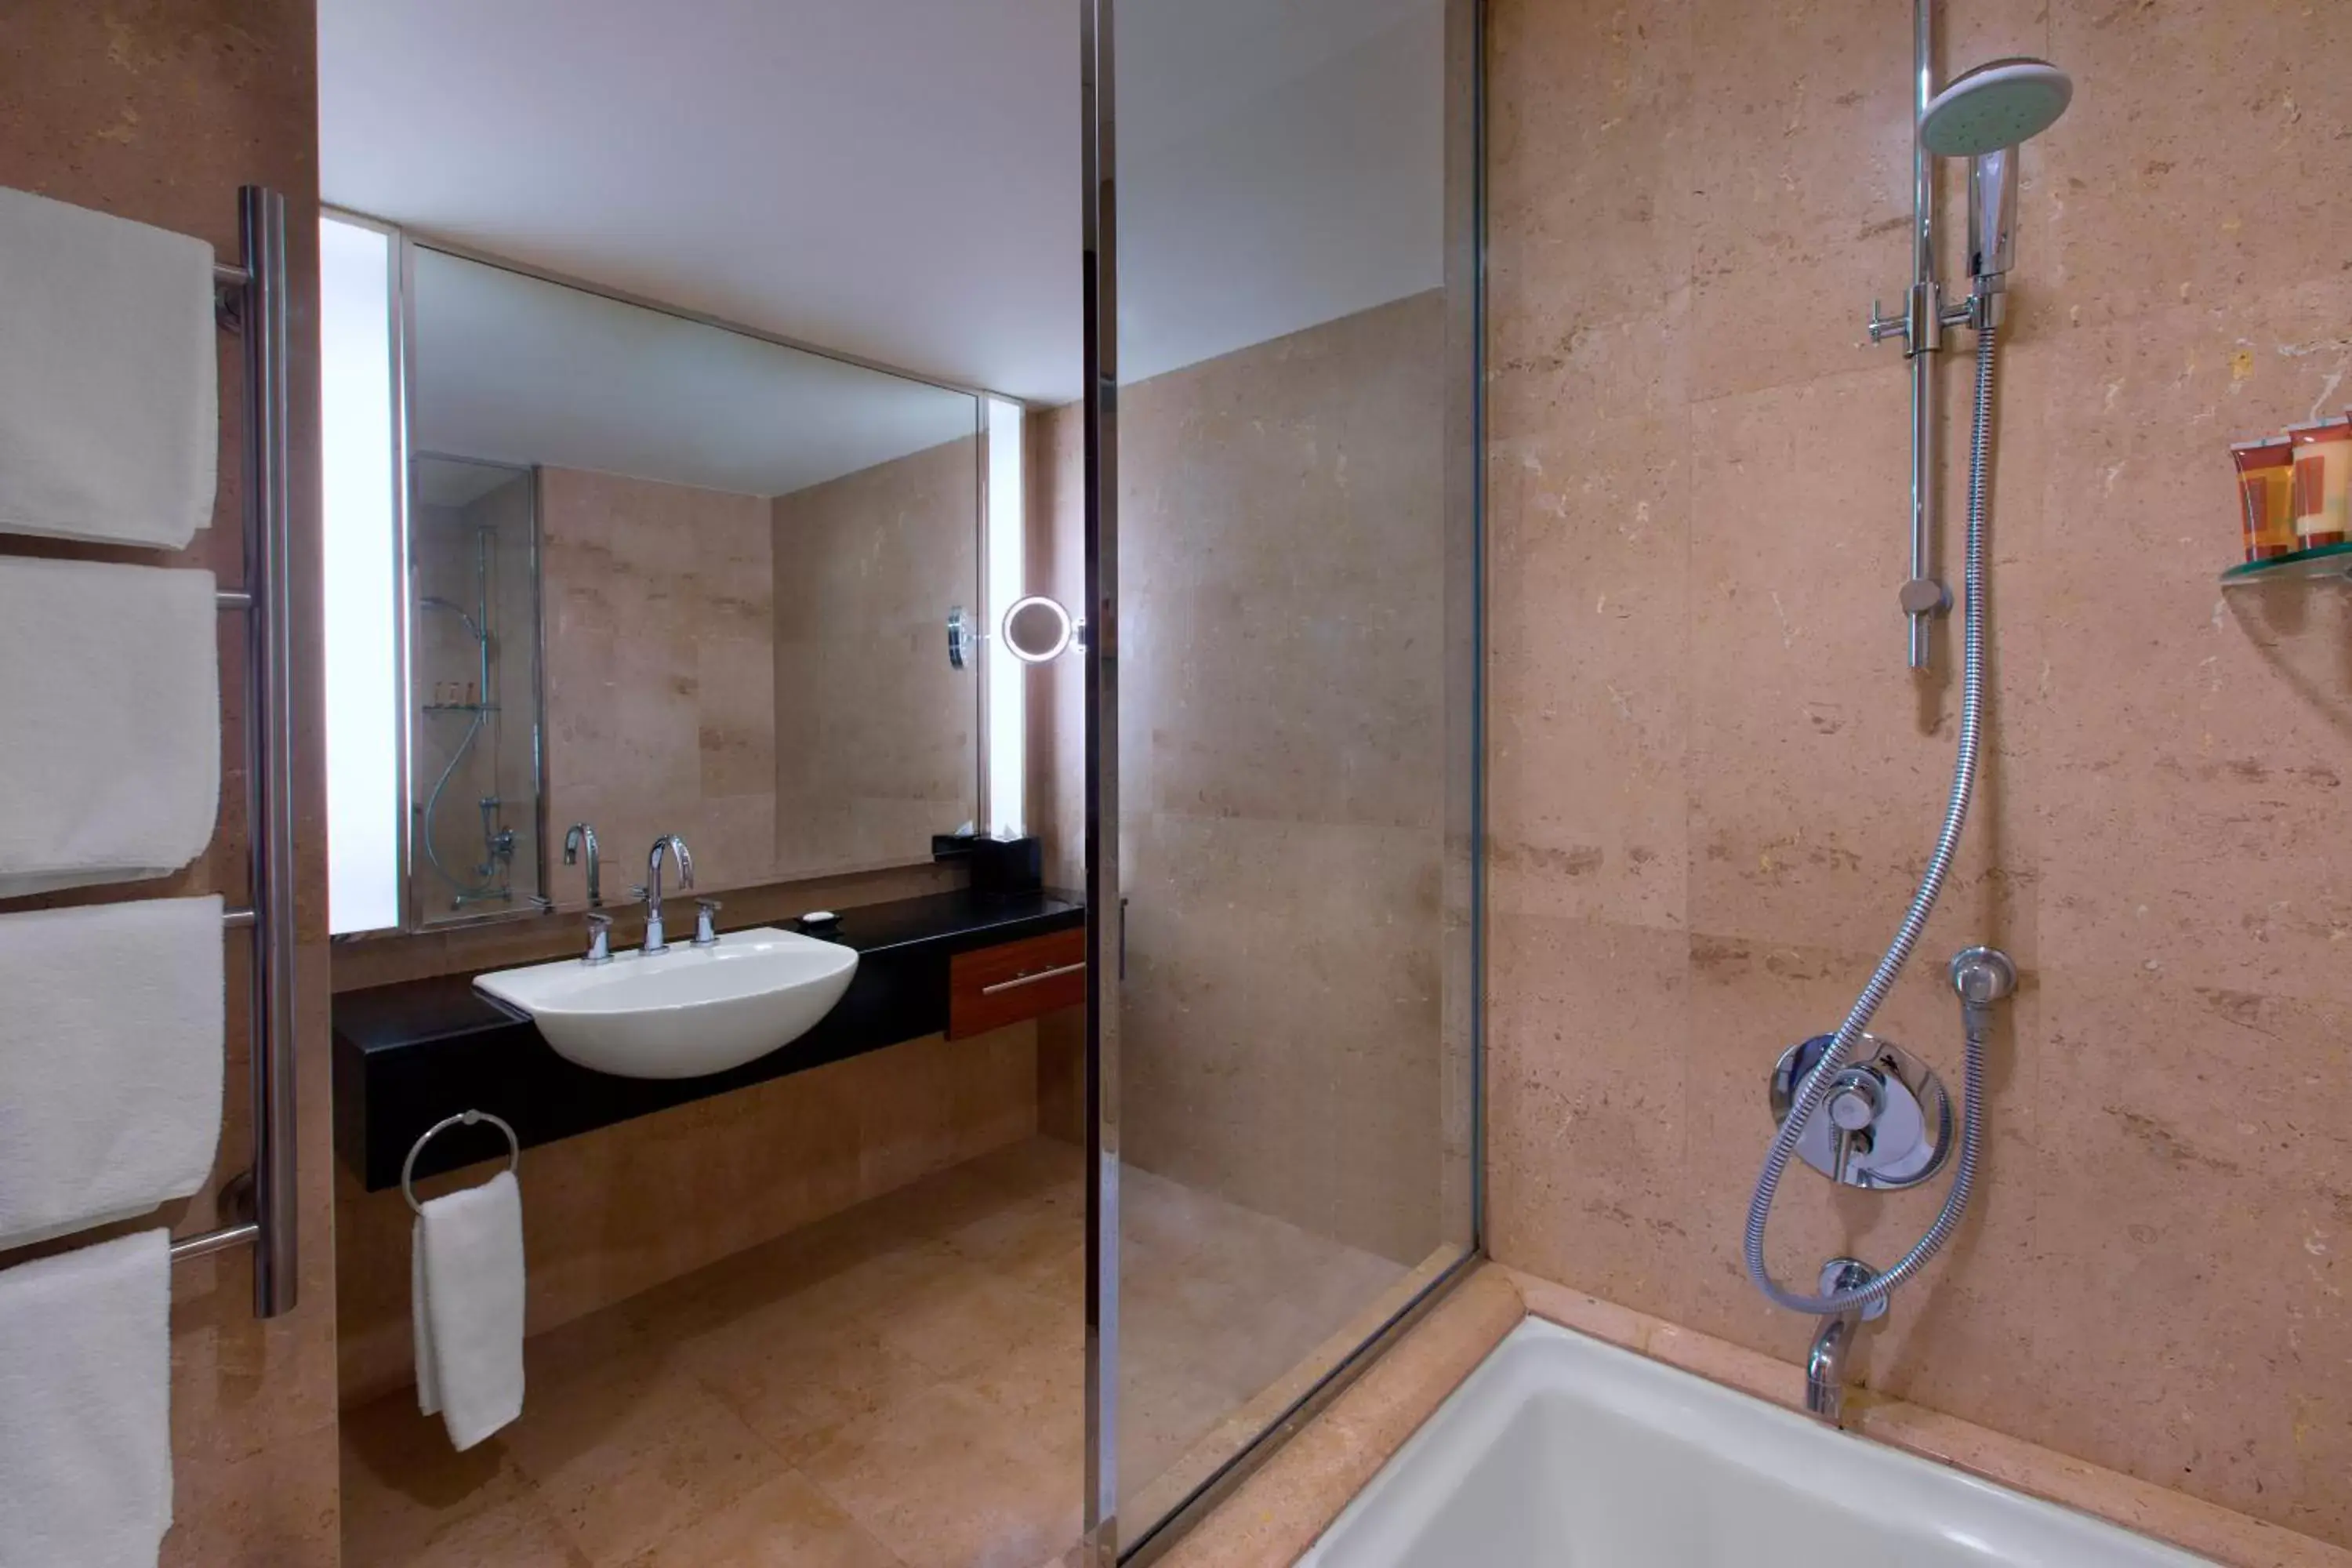 Bathroom in Royal Orchid Sheraton Hotel and Towers